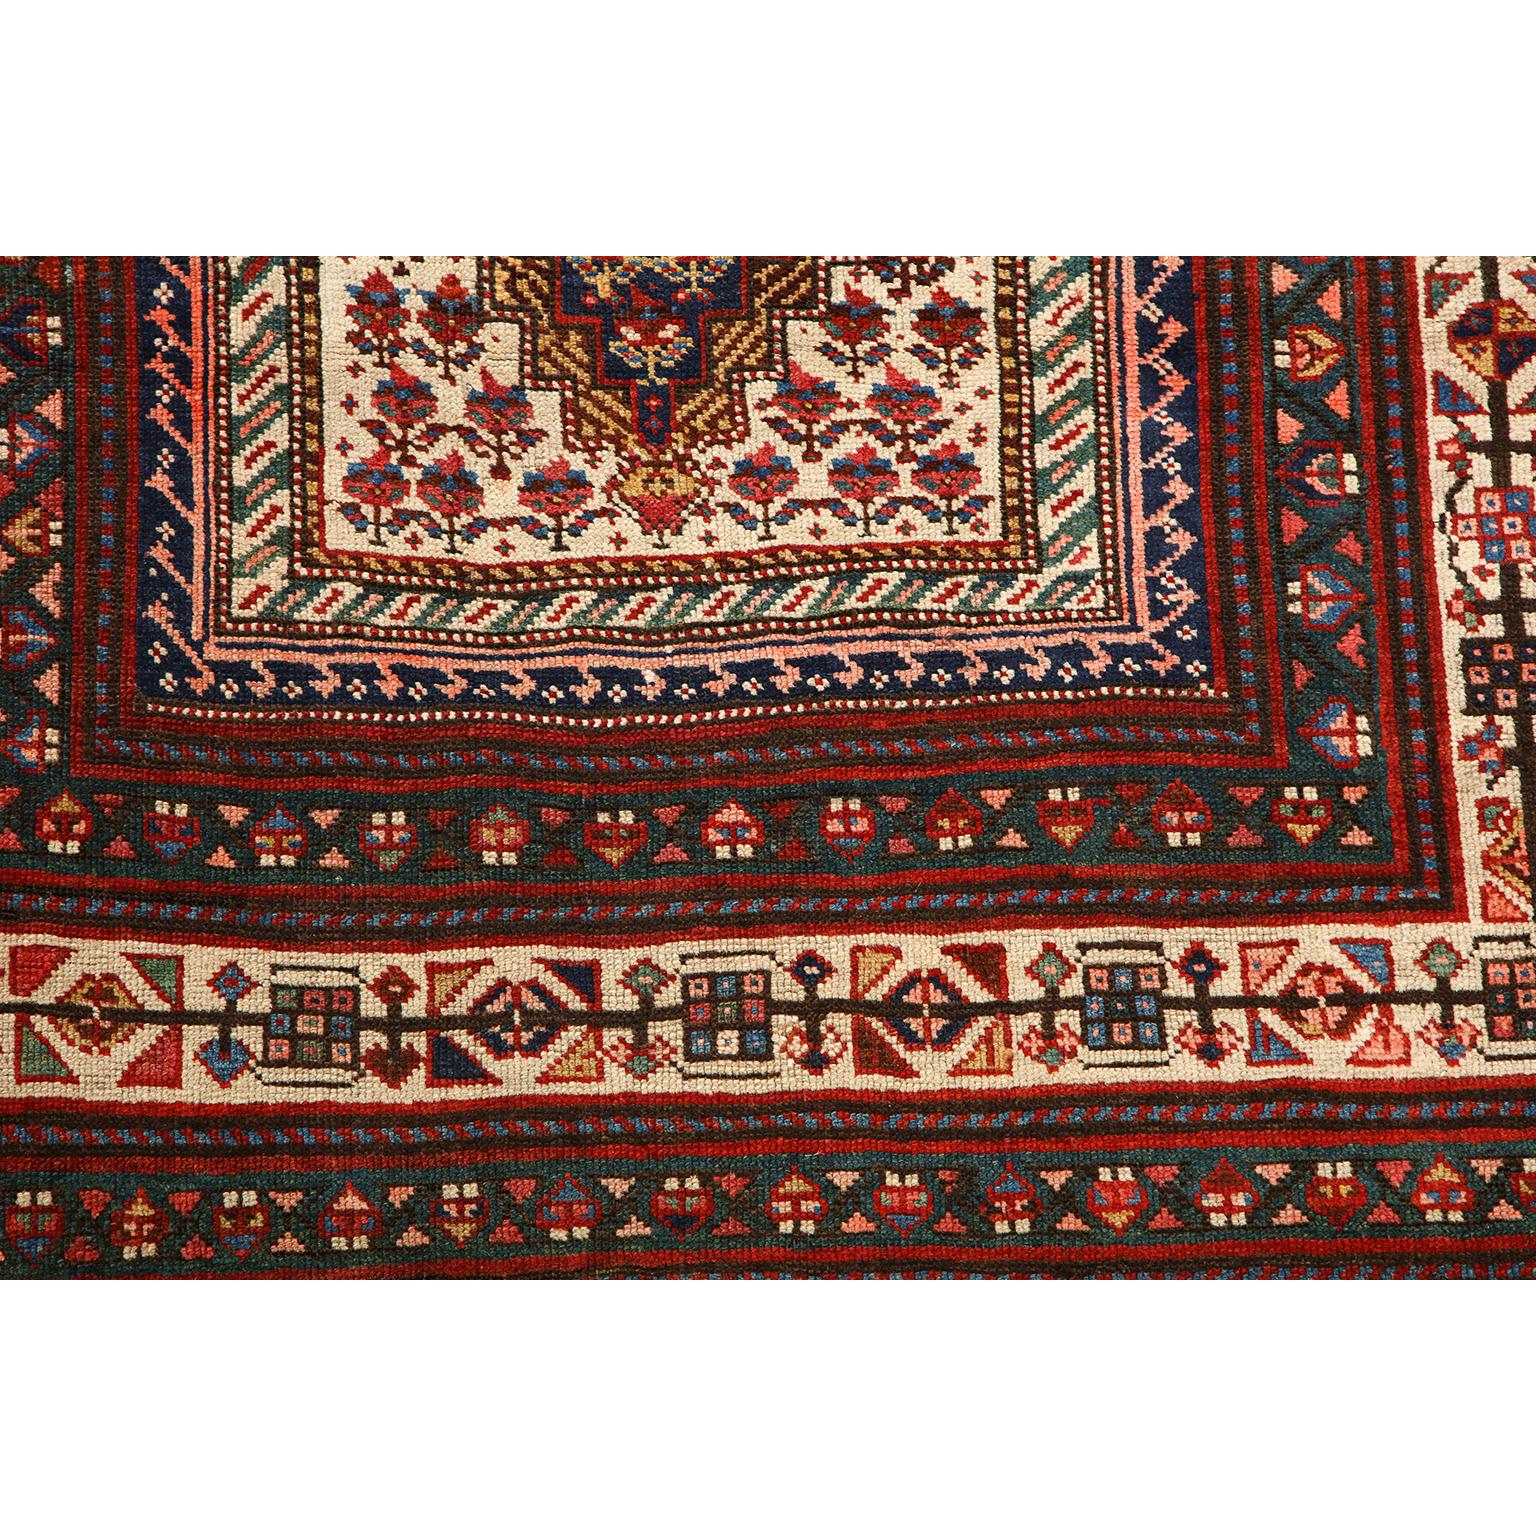 Early 20th Century Antique 1900s Wool Persian Senneh Rug, 5' x 9' For Sale